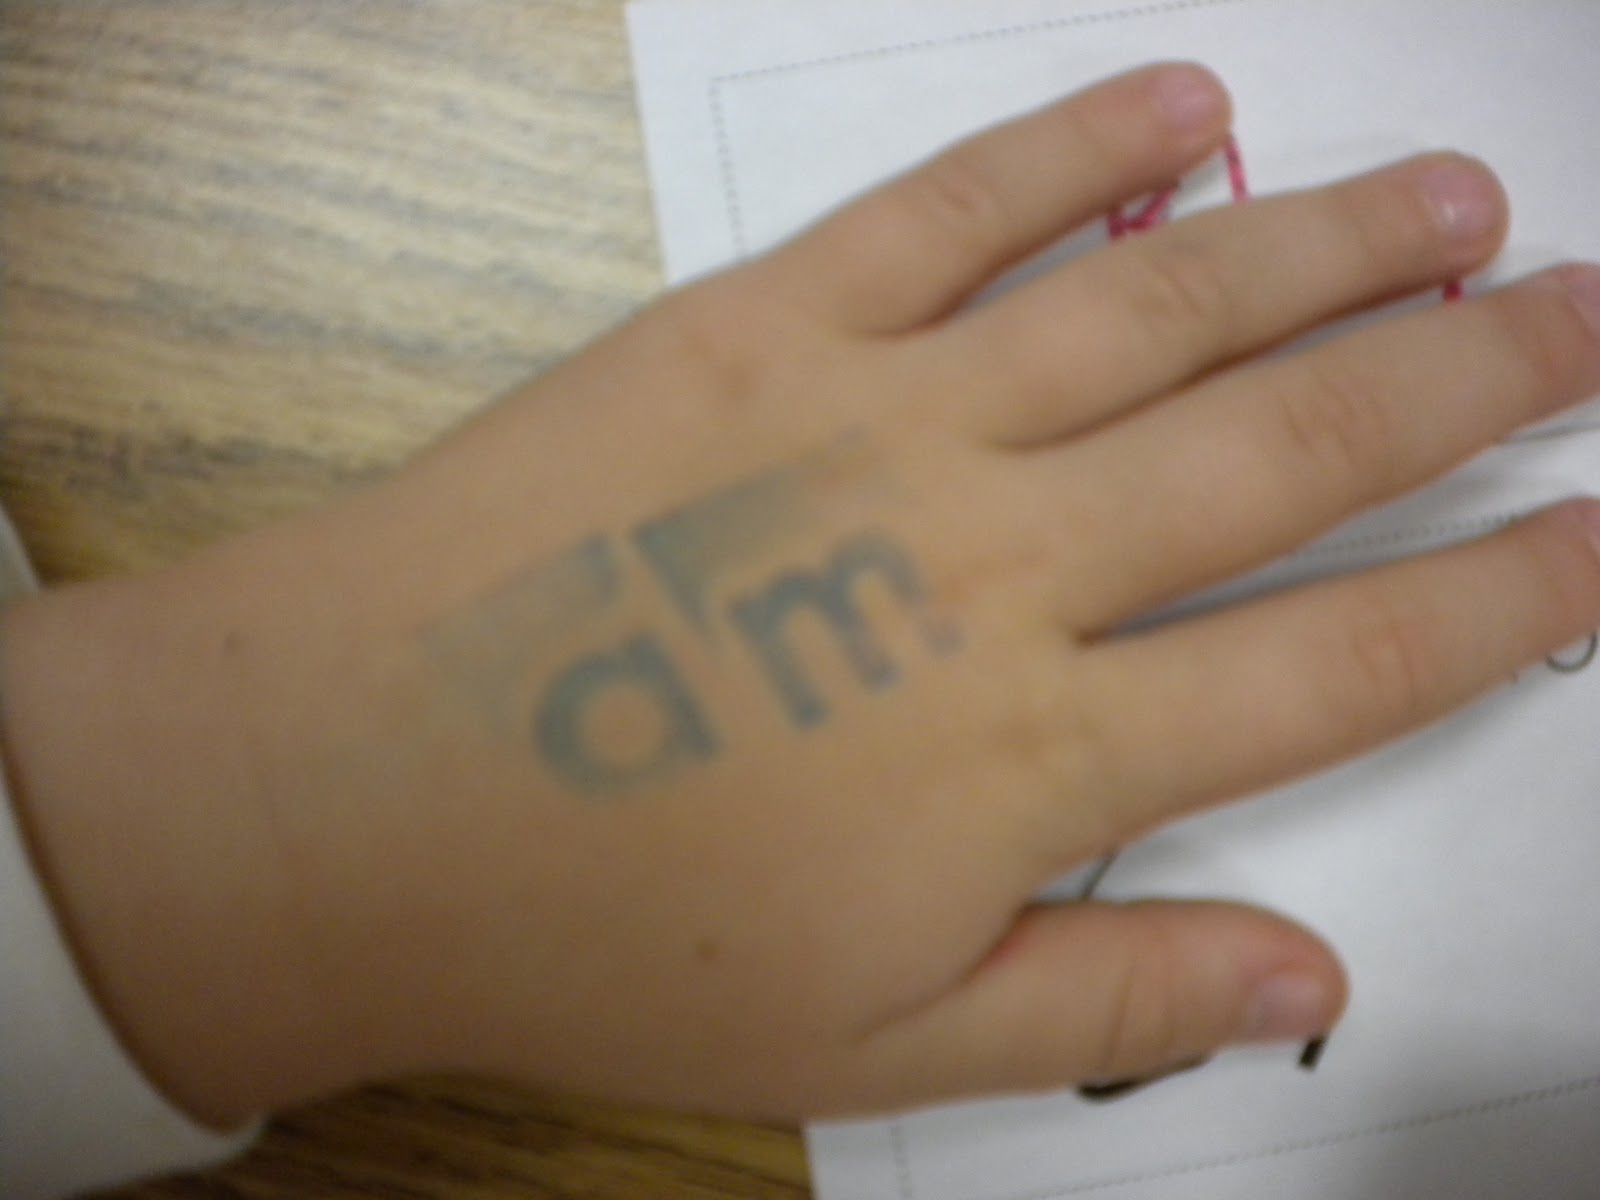 word love tattoo designs Sight word tattoos! Using washable ink, stamp the sight word on their 